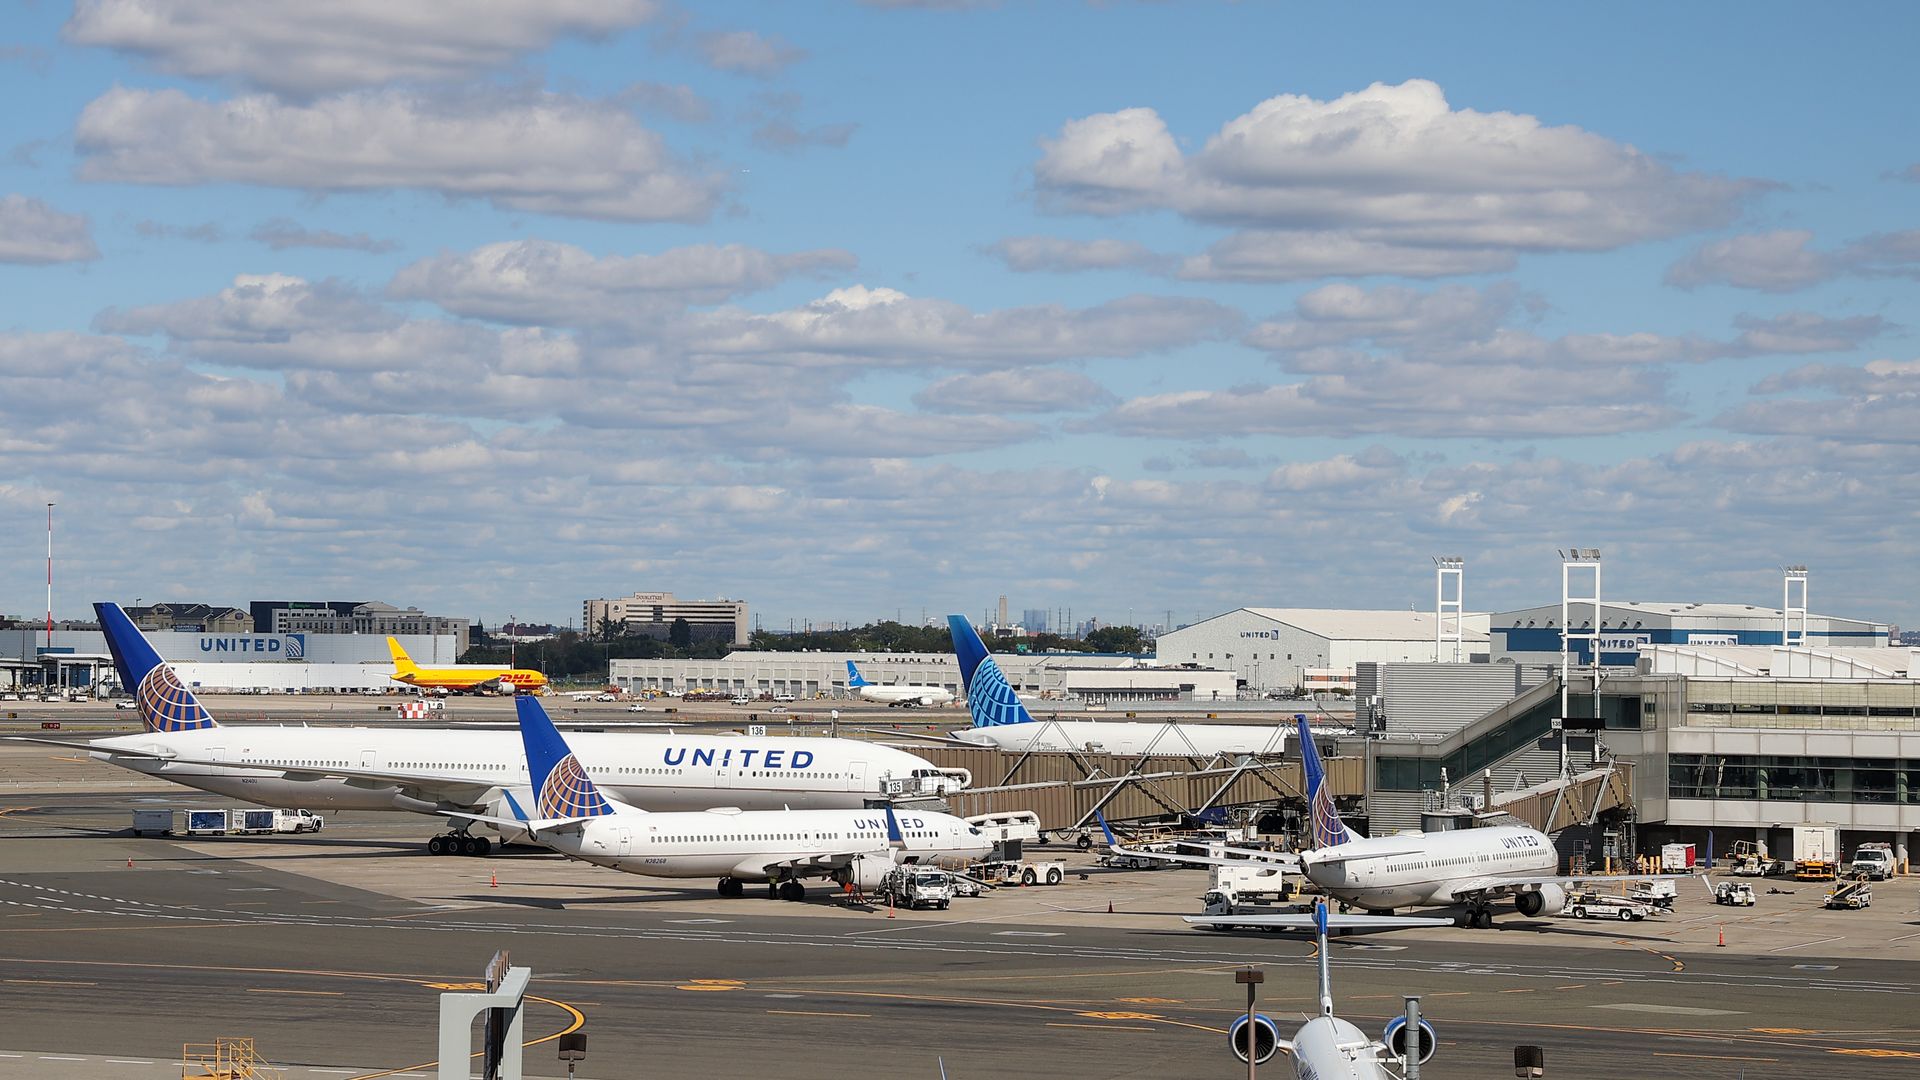 United Airlines planes are seen at Newark International Airport in New Jersey, United States on September 29, 2021. 